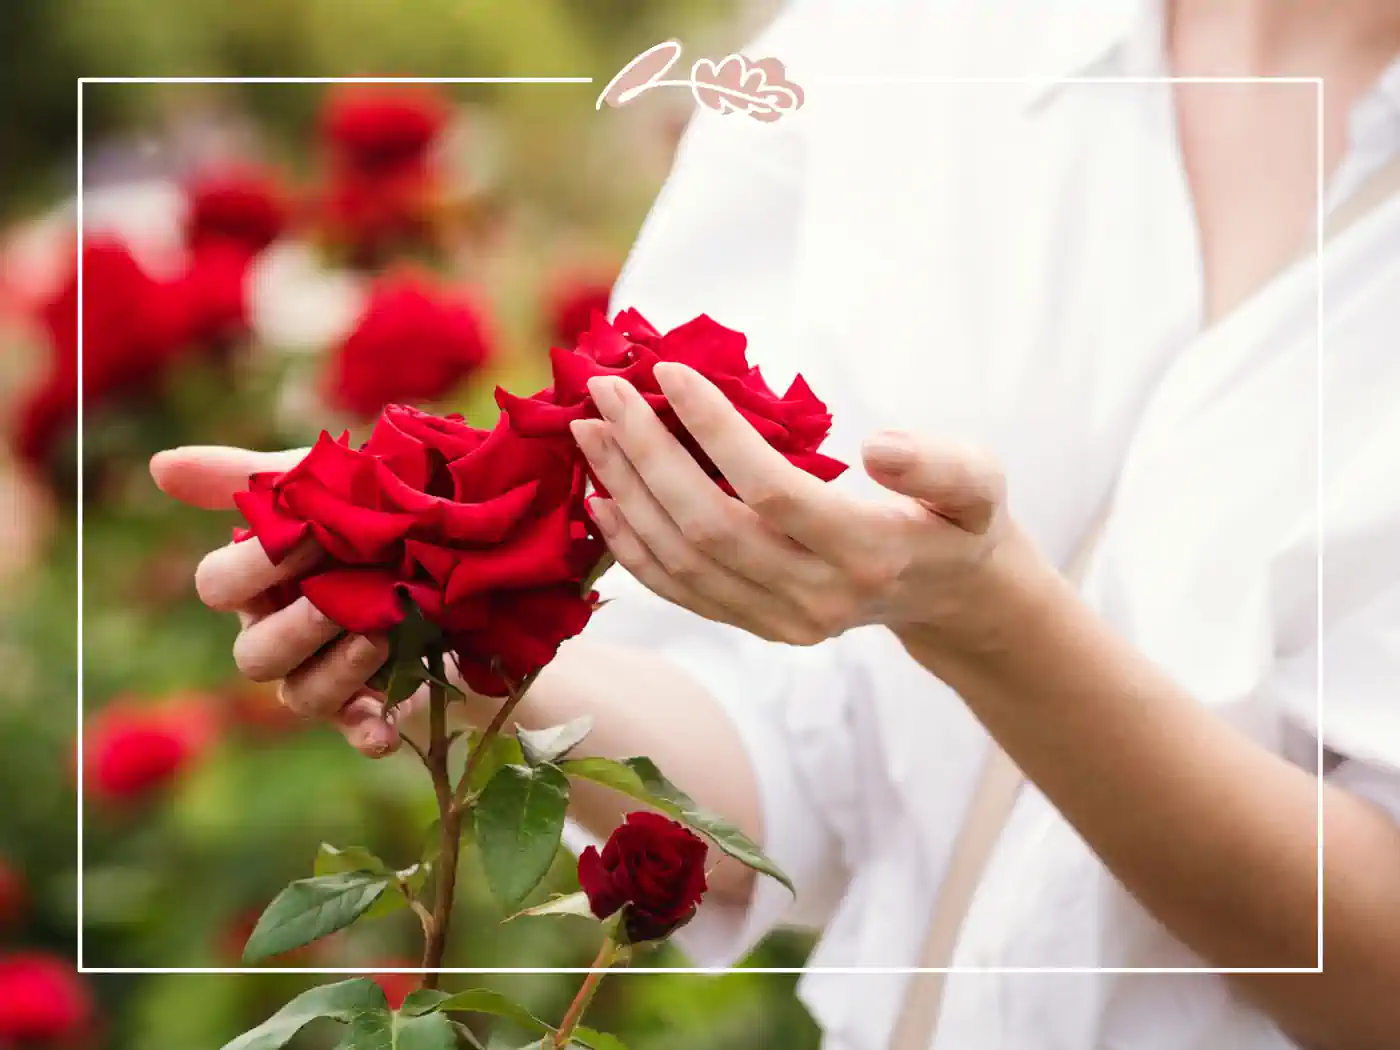 A close-up of a person gently holding a bunch of red roses in a garden. "Garden Delight" Fabulous Flowers and Gifts